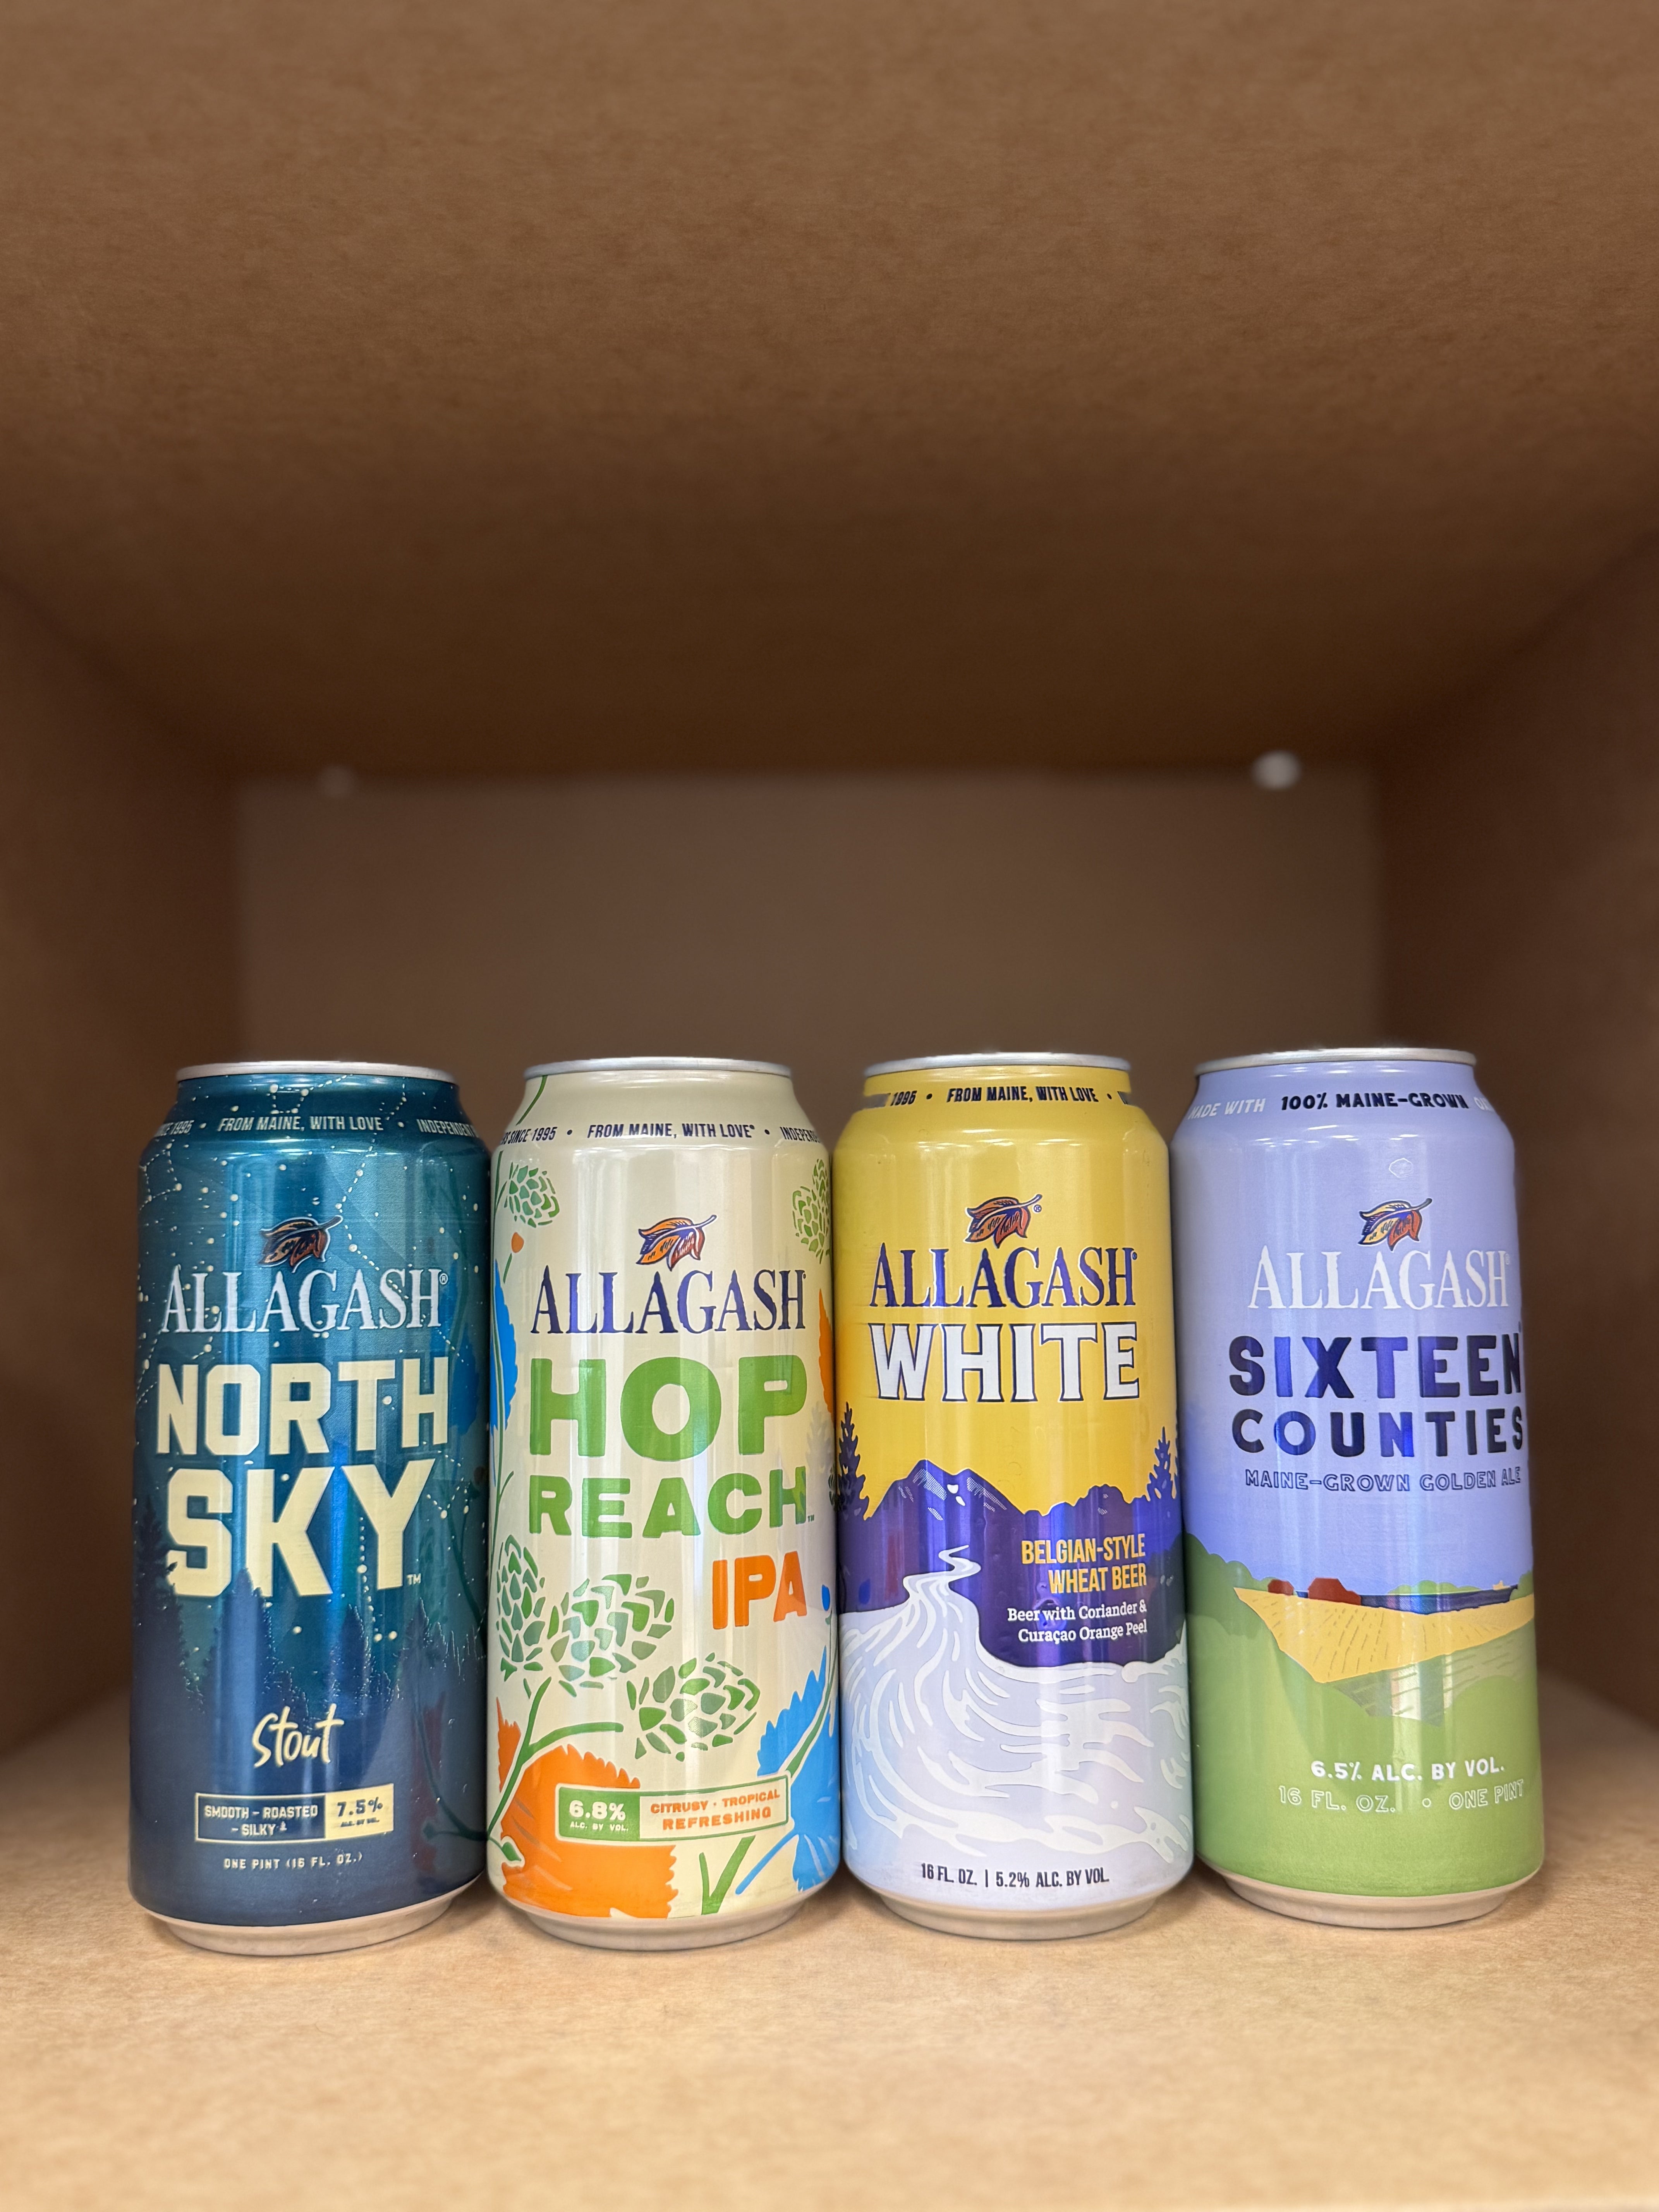 -Allagash- Allagash 🚀 Take Off Set 1-Packs & Cases- Only @ Beer Republic - The best online beer store for American & Canadian craft beer - Buy beer online from the USA and Canada - Bier online kopen - Amerikaans bier kopen - Craft beer store - Craft beer kopen - Amerikanisch bier kaufen - Bier online kaufen - Acheter biere online - IPA - Stout - Porter - New England IPA - Hazy IPA - Imperial Stout - Barrel Aged - Barrel Aged Imperial Stout - Brown - Dark beer - Blond - Blonde - Pilsner - Lager - Wheat - Wei